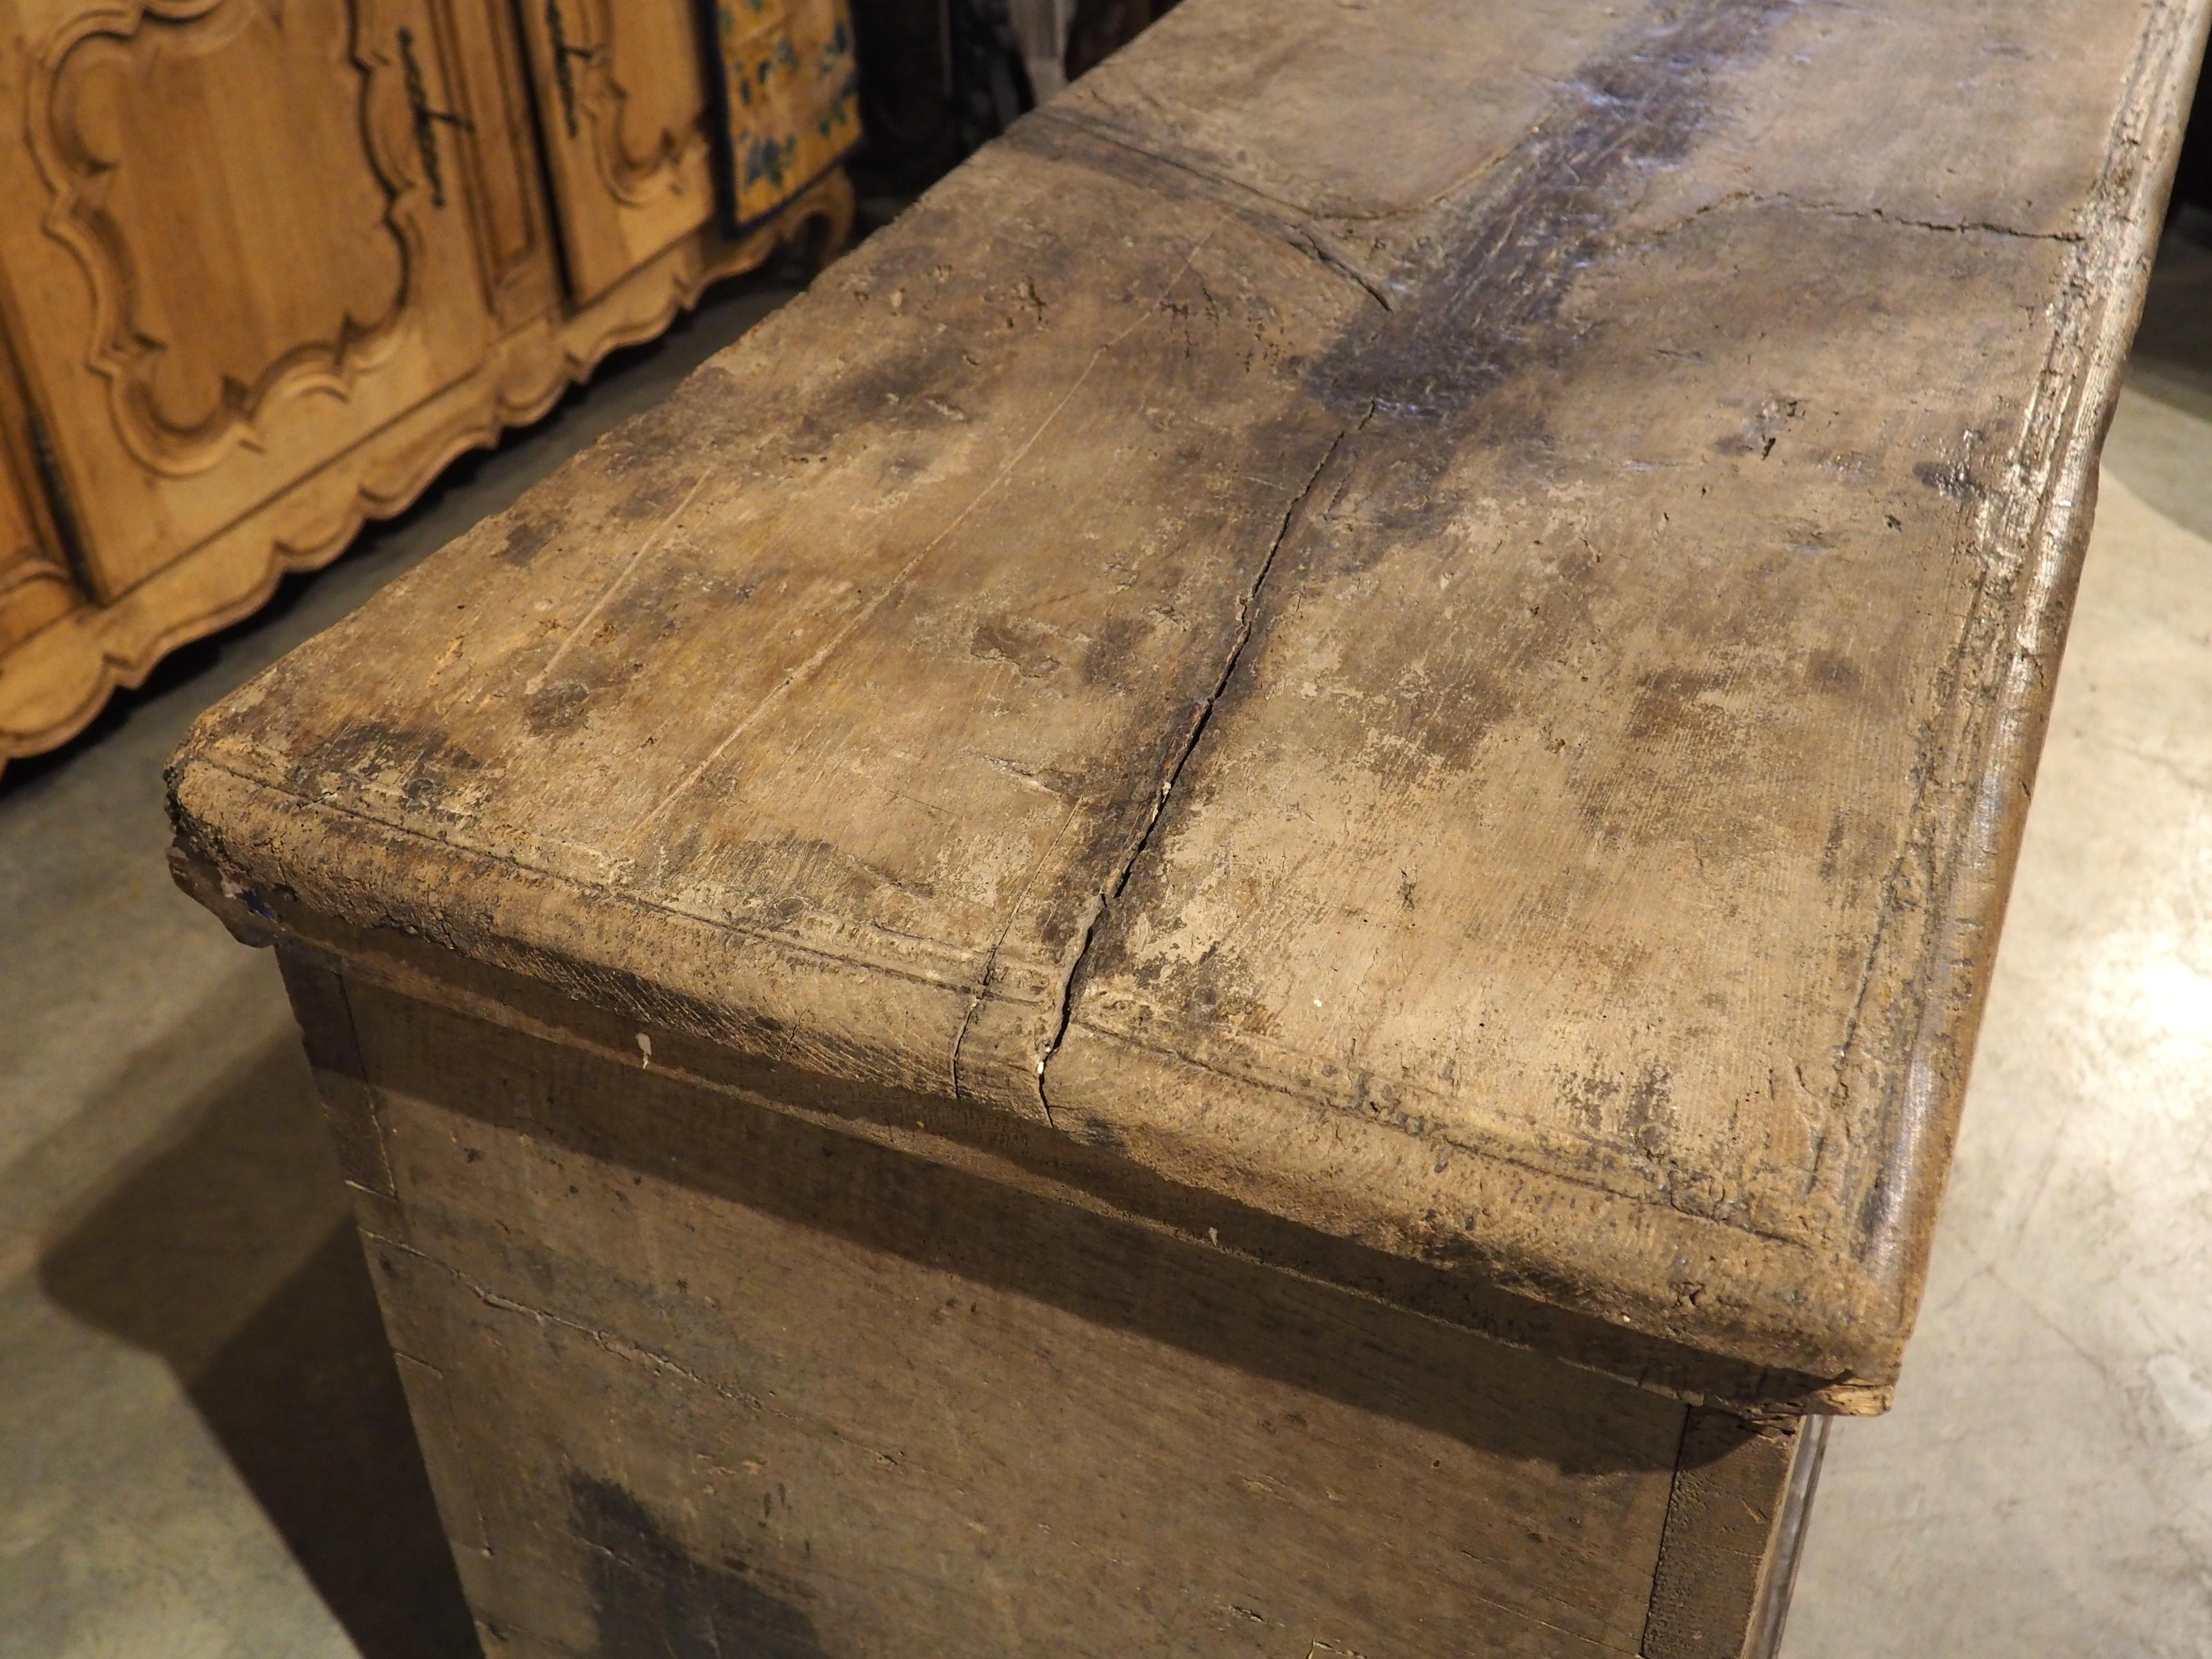 Huge Antique Carved Oak Chest or Trunk from Spain, Late 1500s to Early 1600s 5